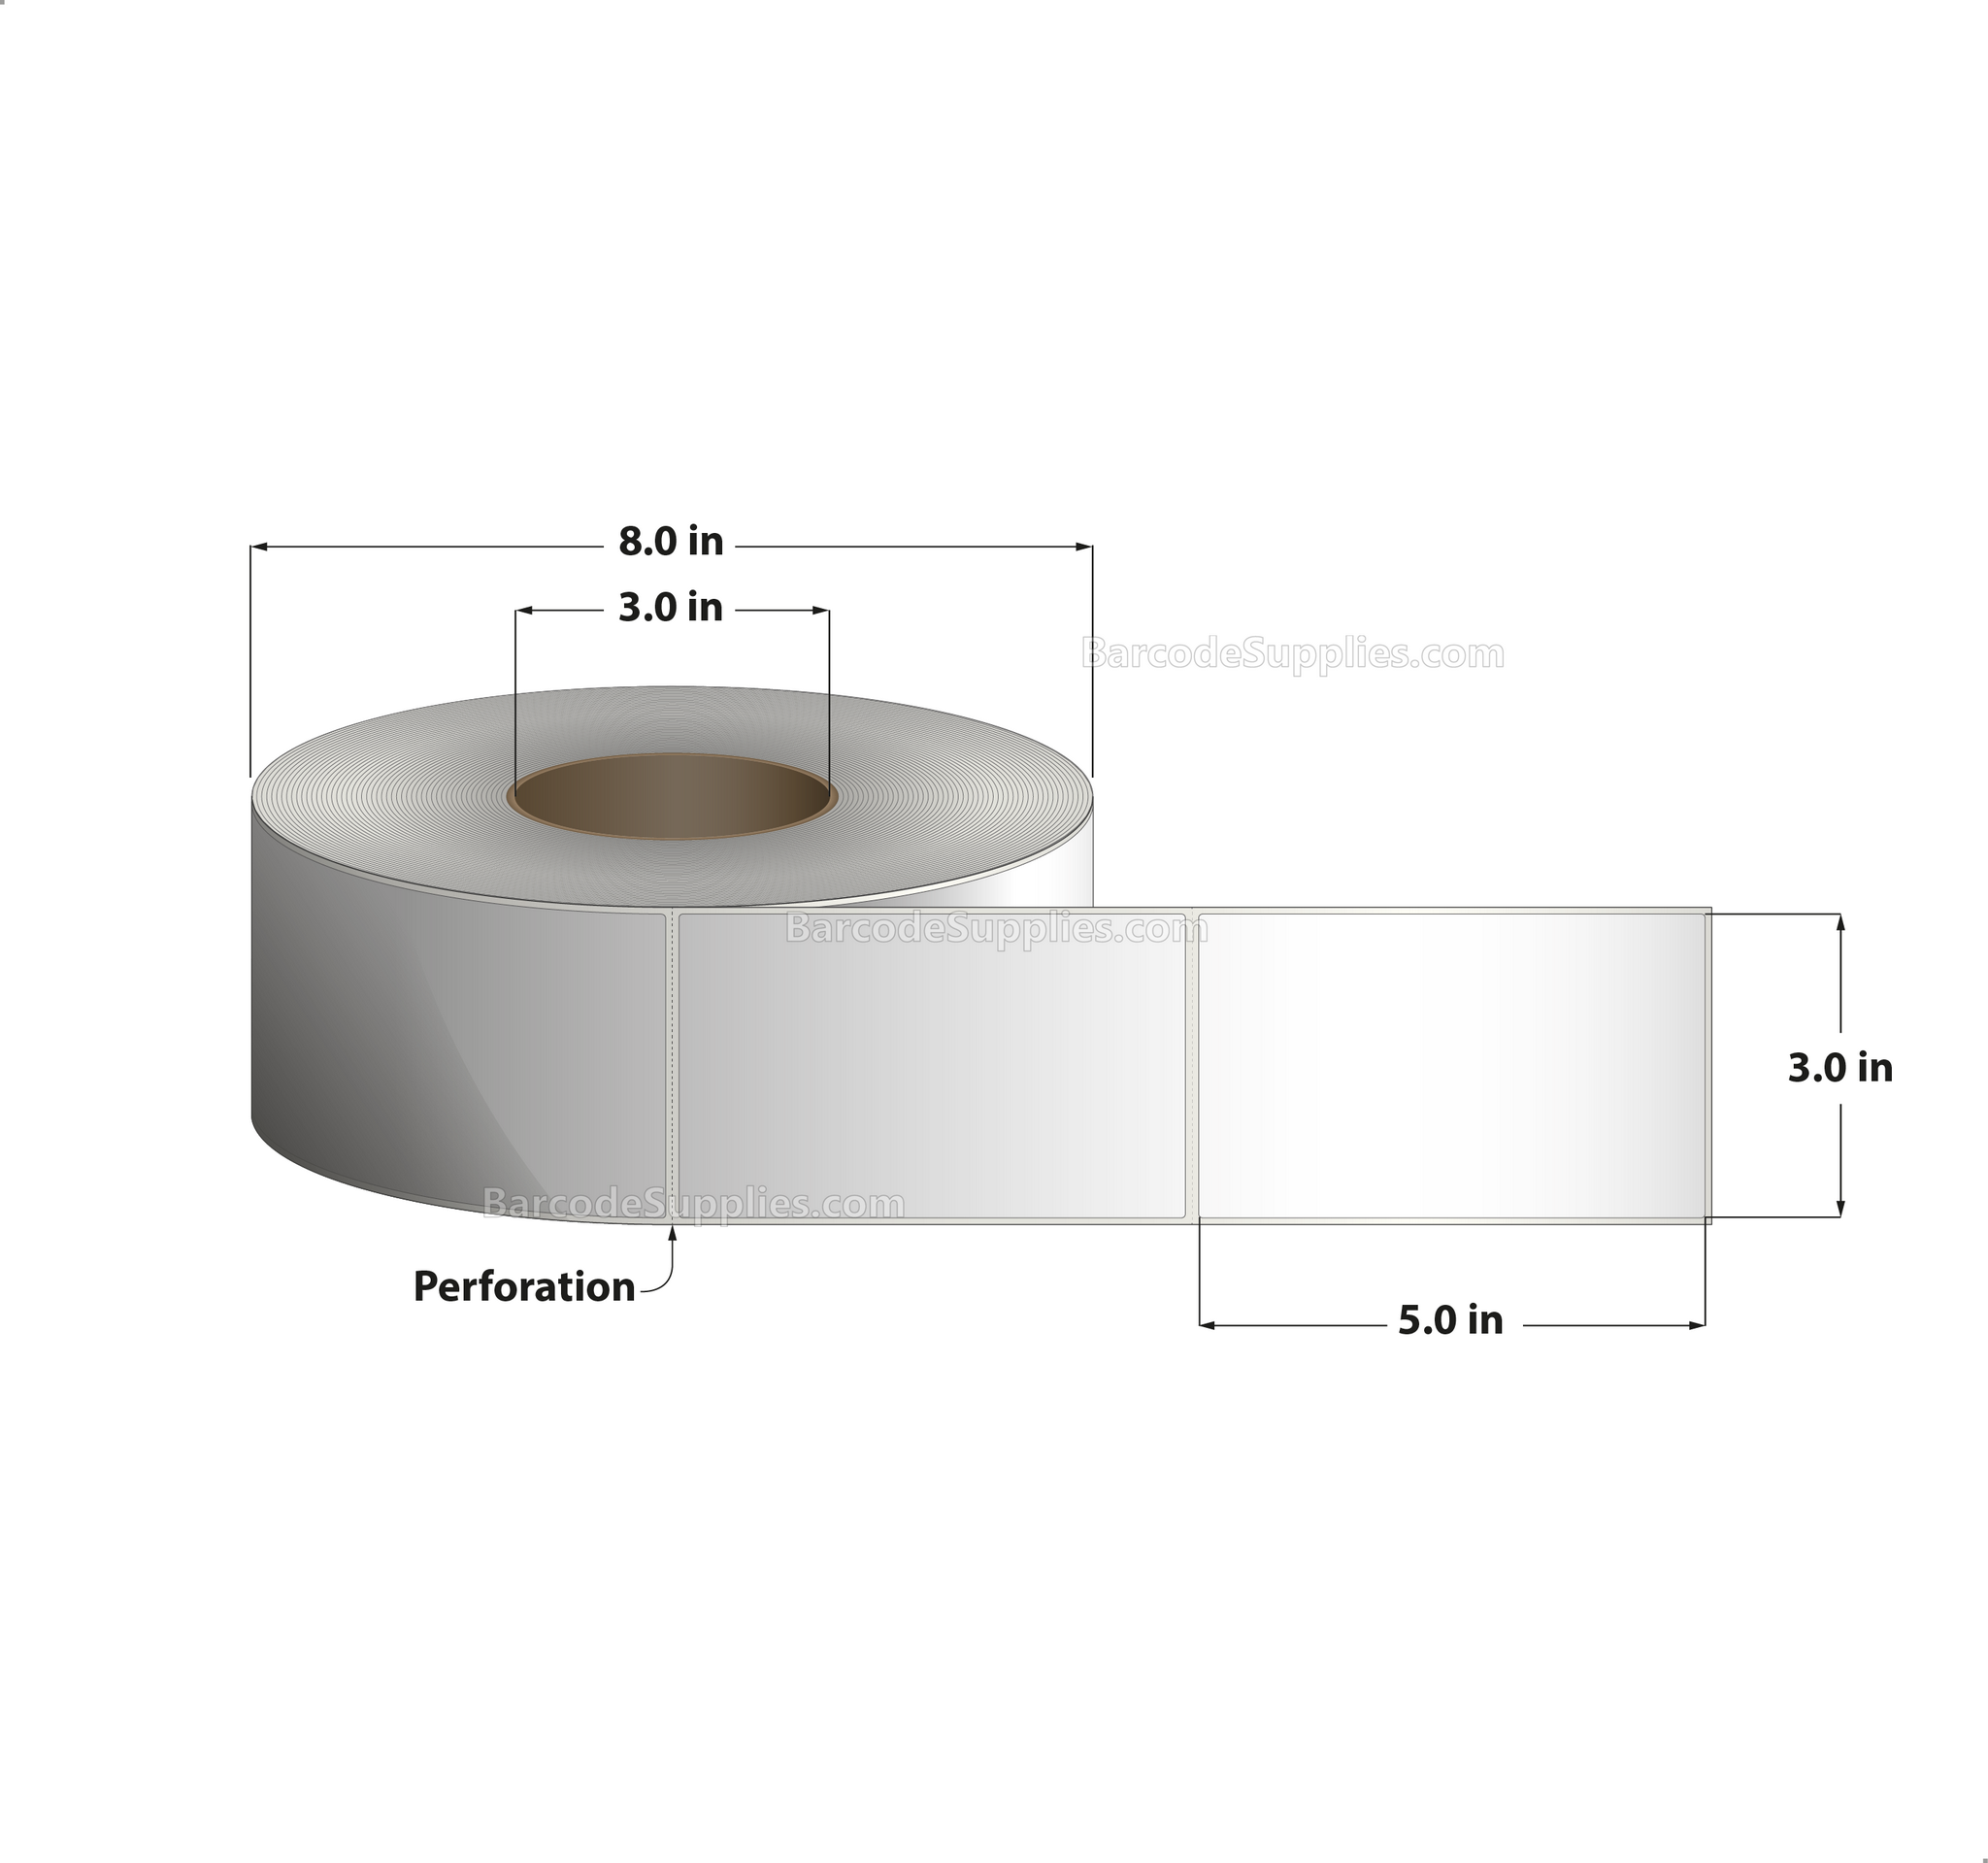 3 x 5 Thermal Transfer White Labels With Removable Adhesive - Perforated - 1200 Labels Per Roll - Carton Of 8 Rolls - 9600 Labels Total - MPN: RE-3-5-1200-3